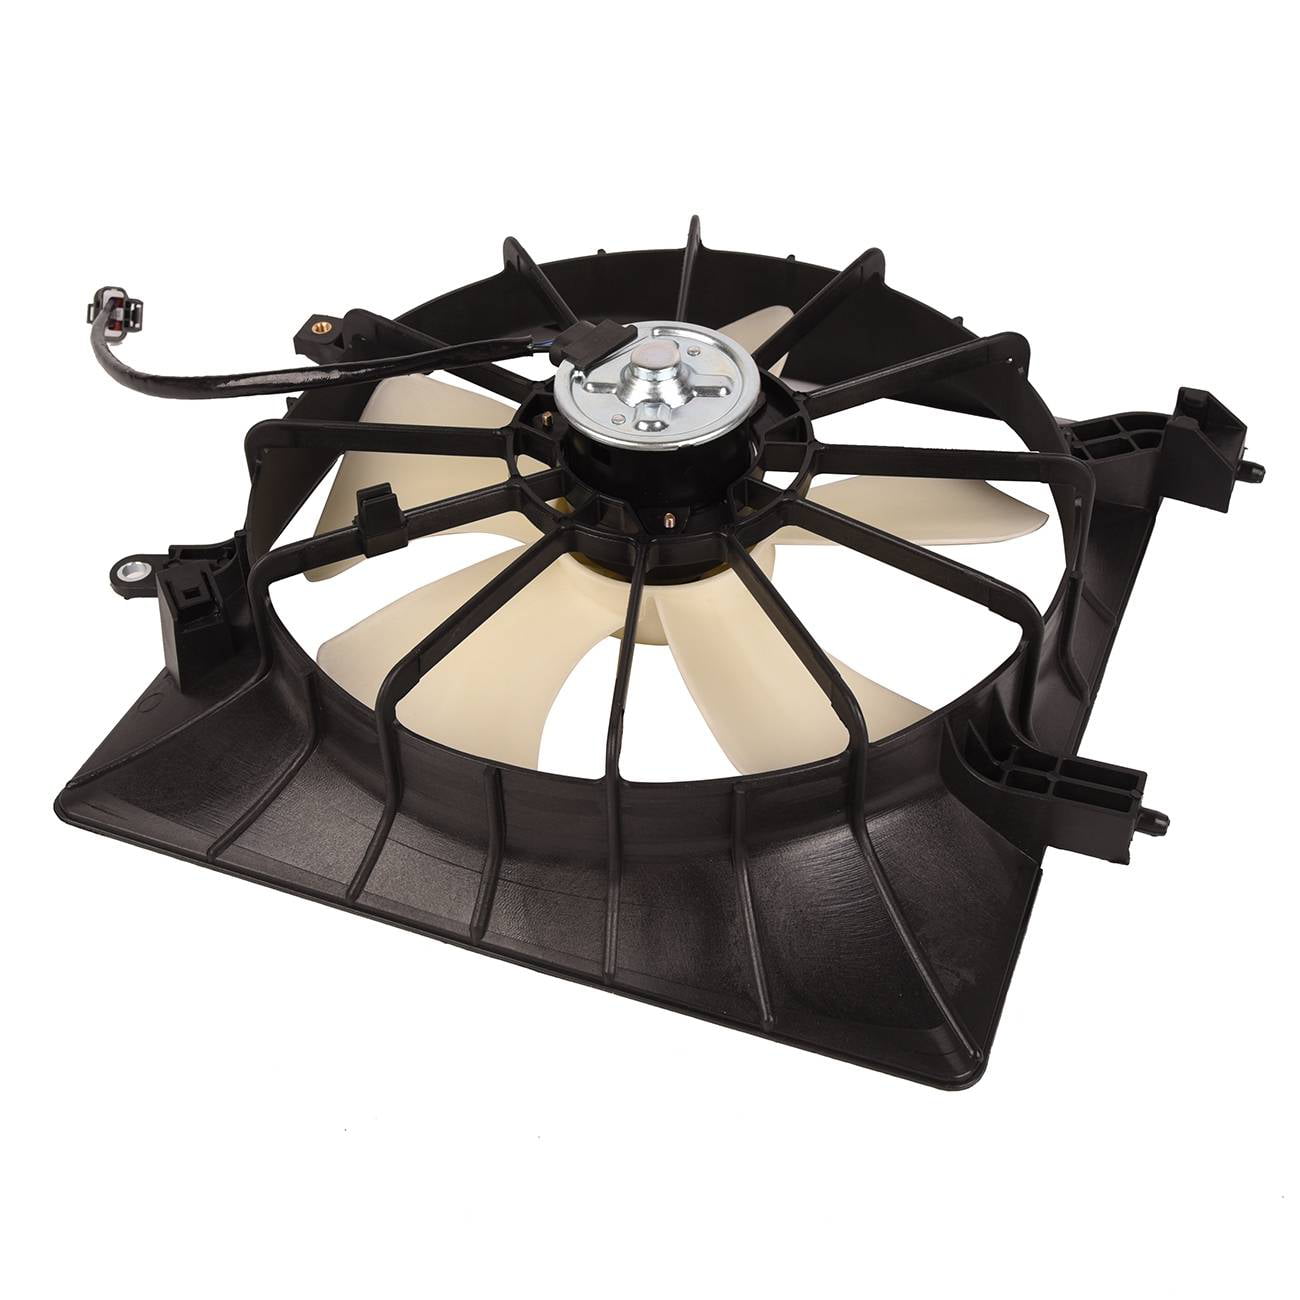 New Radiator Cooling Fan For 2012-2013 Hyundai Accent Veloster 1.6L 253801R050 